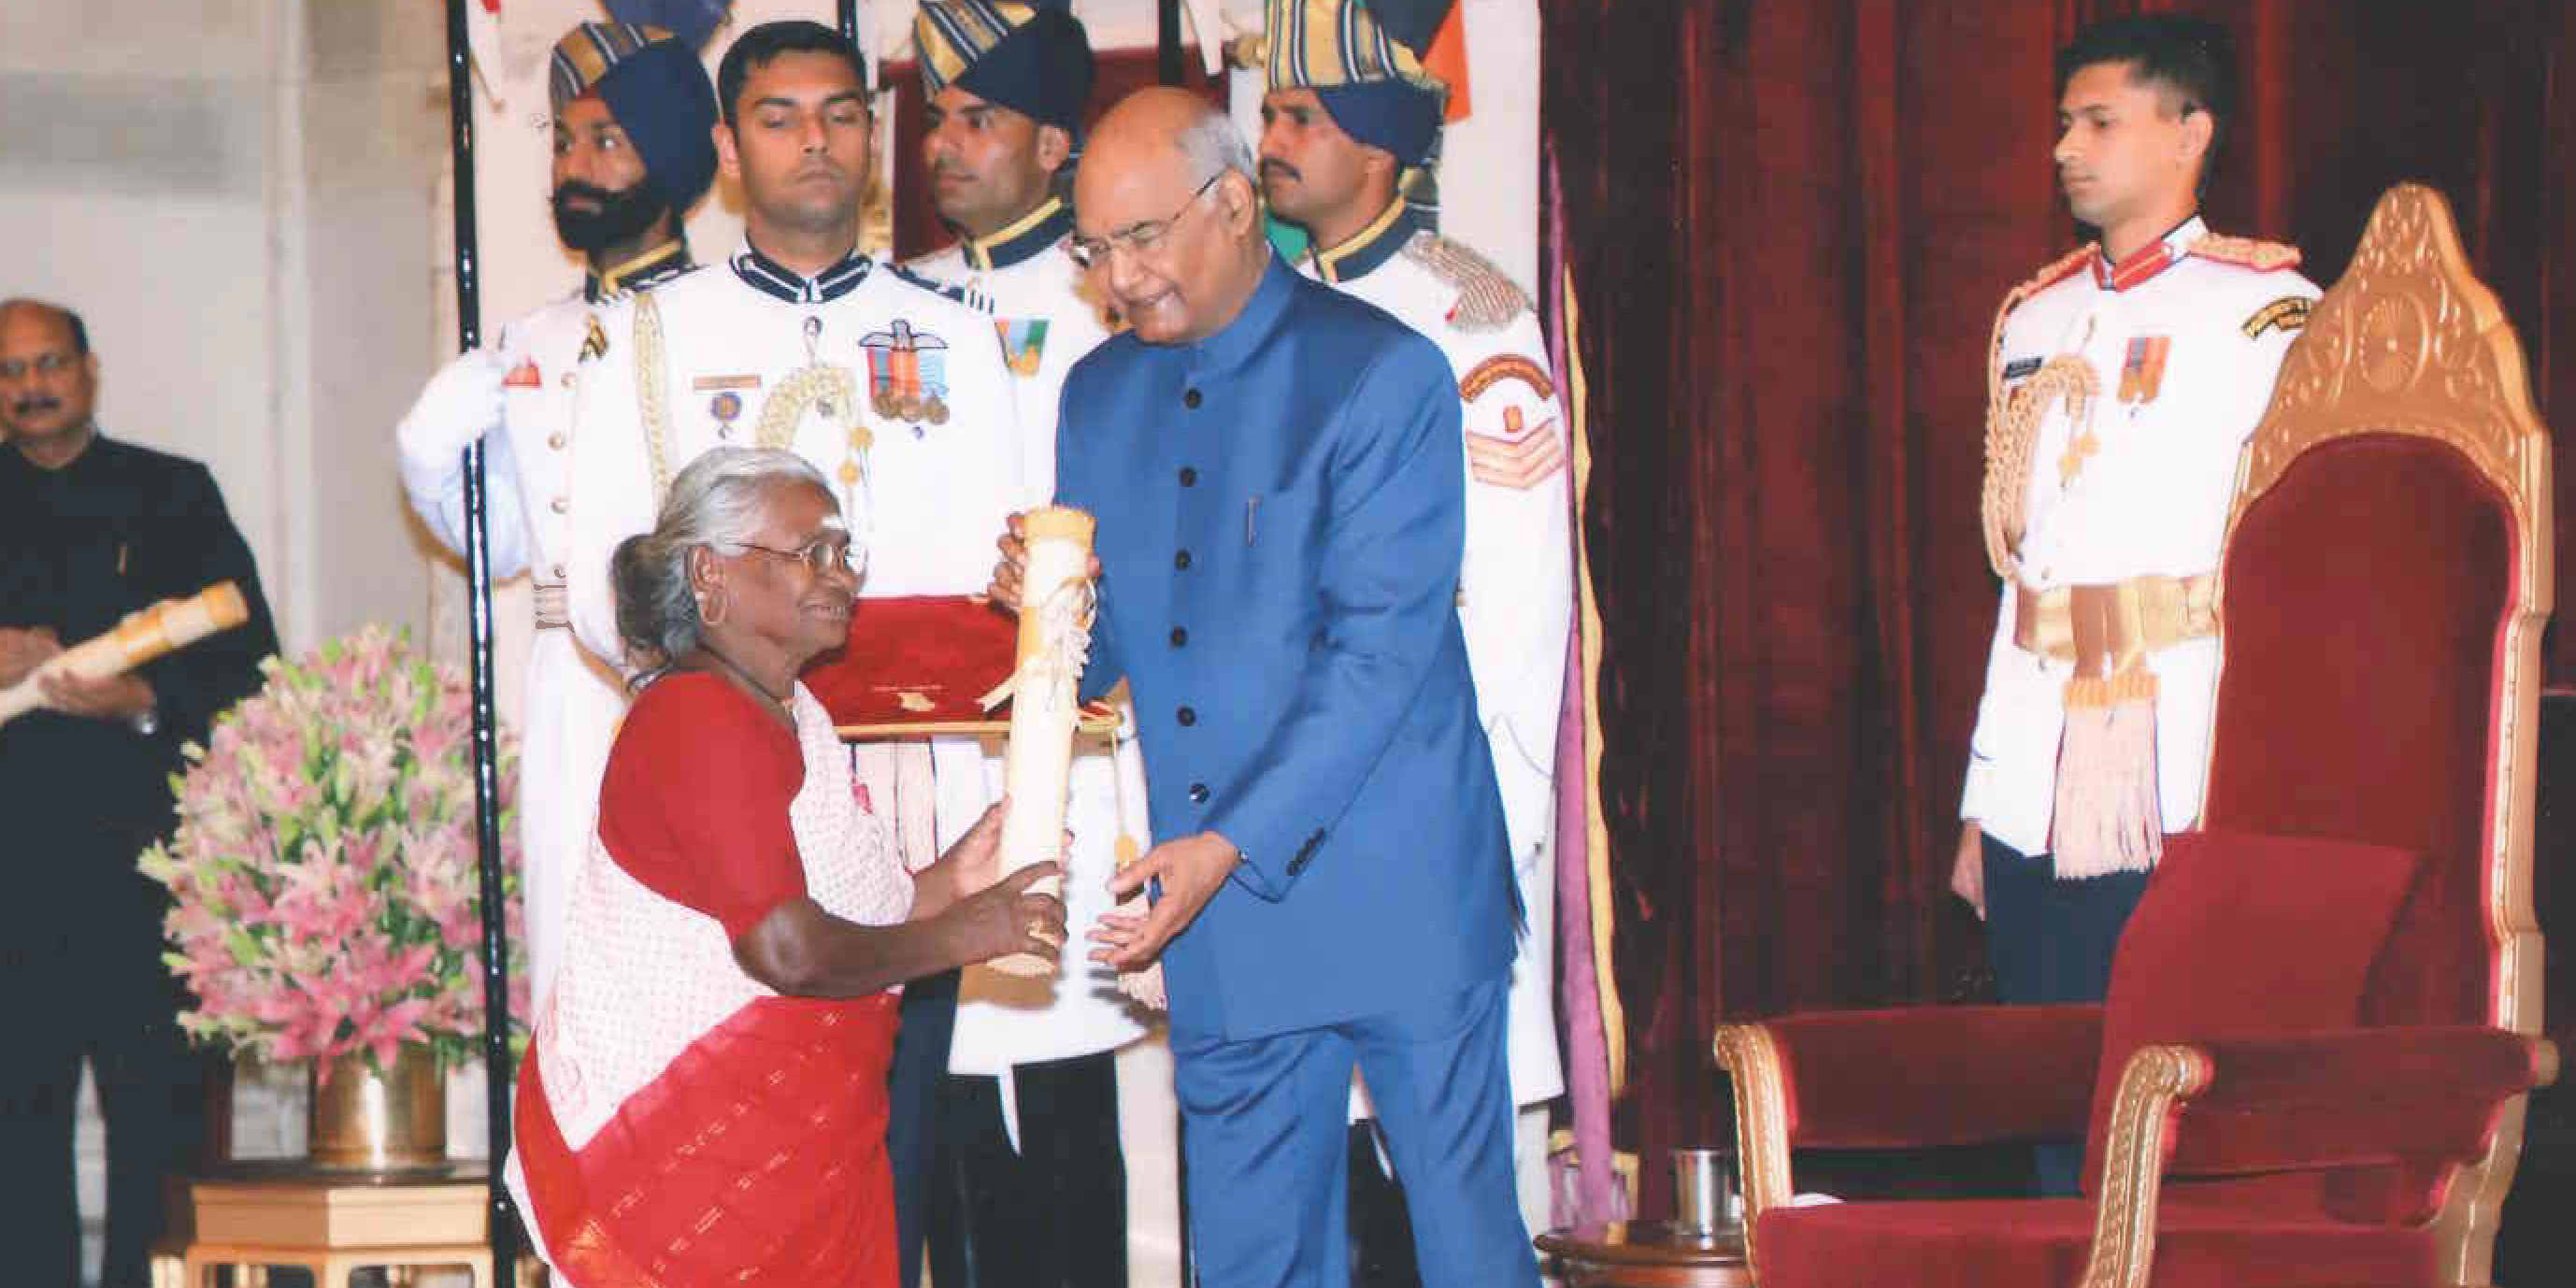 Our Kalanjiam Mutual Movement Leader<b>Smt Chinnapillai</b> is honored with 4th highest civilian award, Padma Shri by the presidents of India.